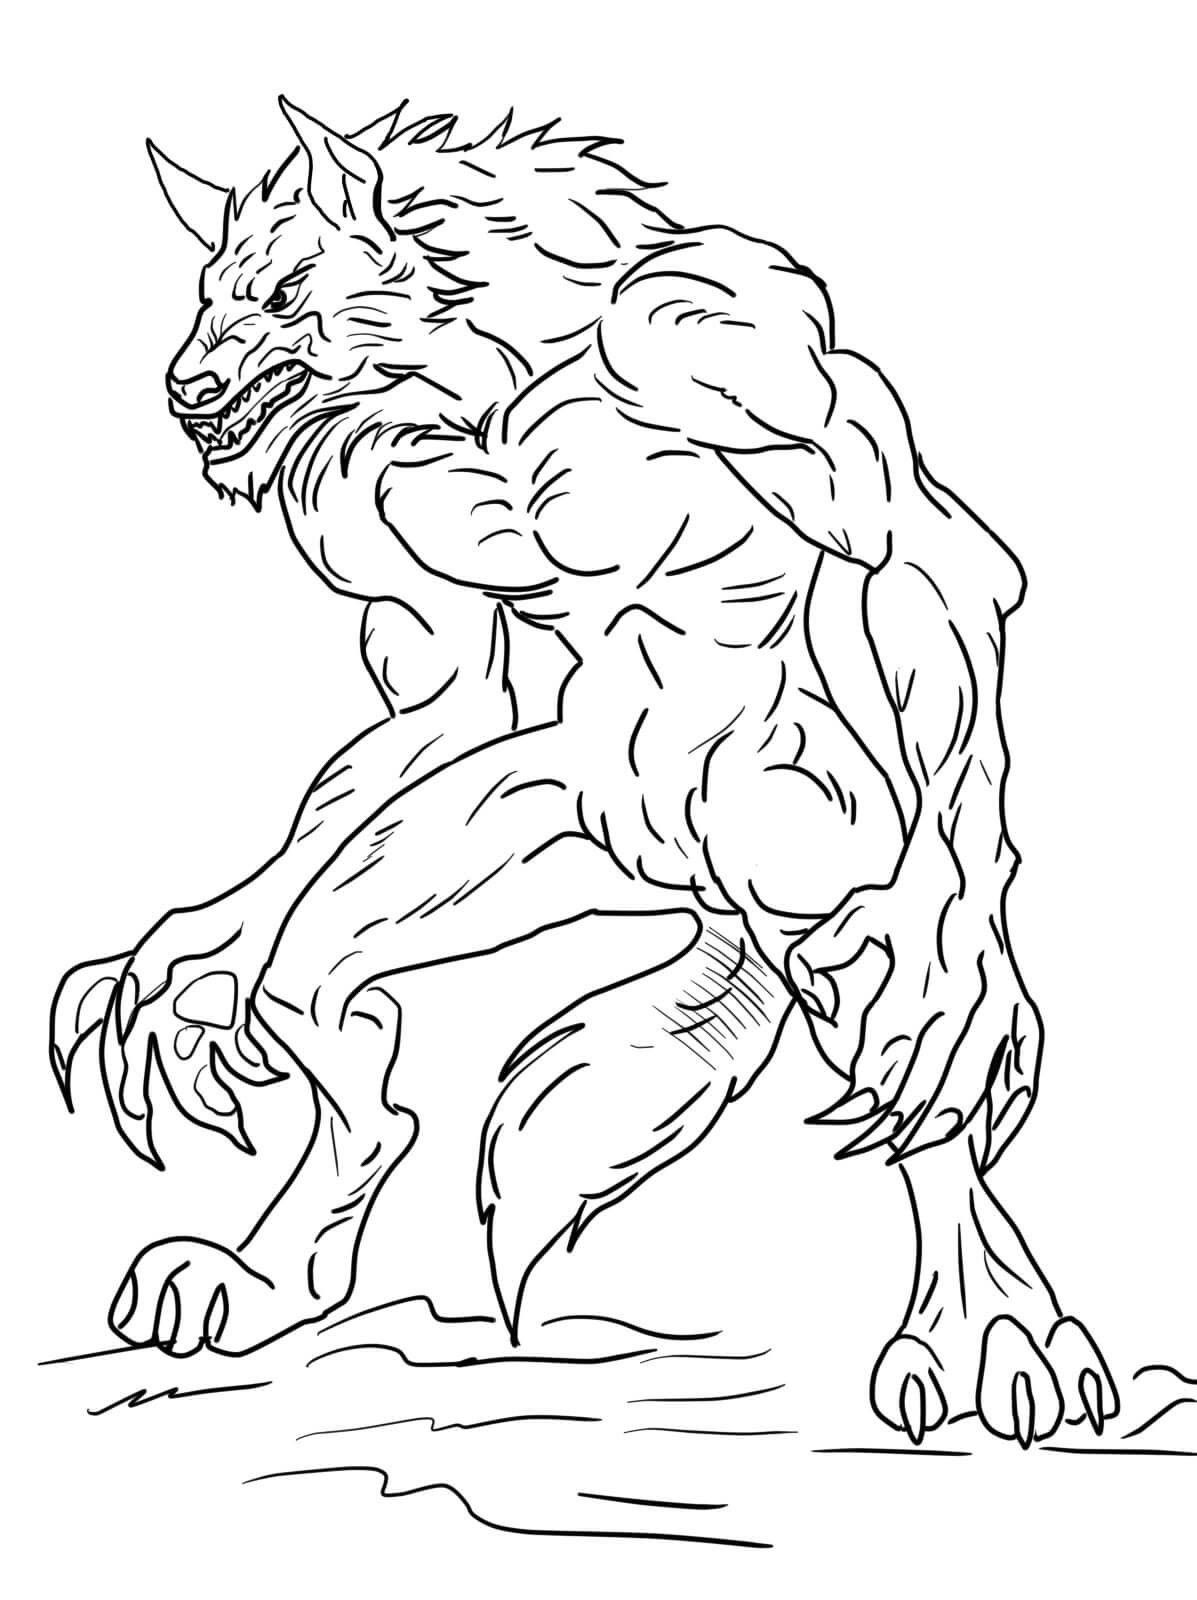 27+ Scary Werewolf Coloring Pages - ToshiGeddes